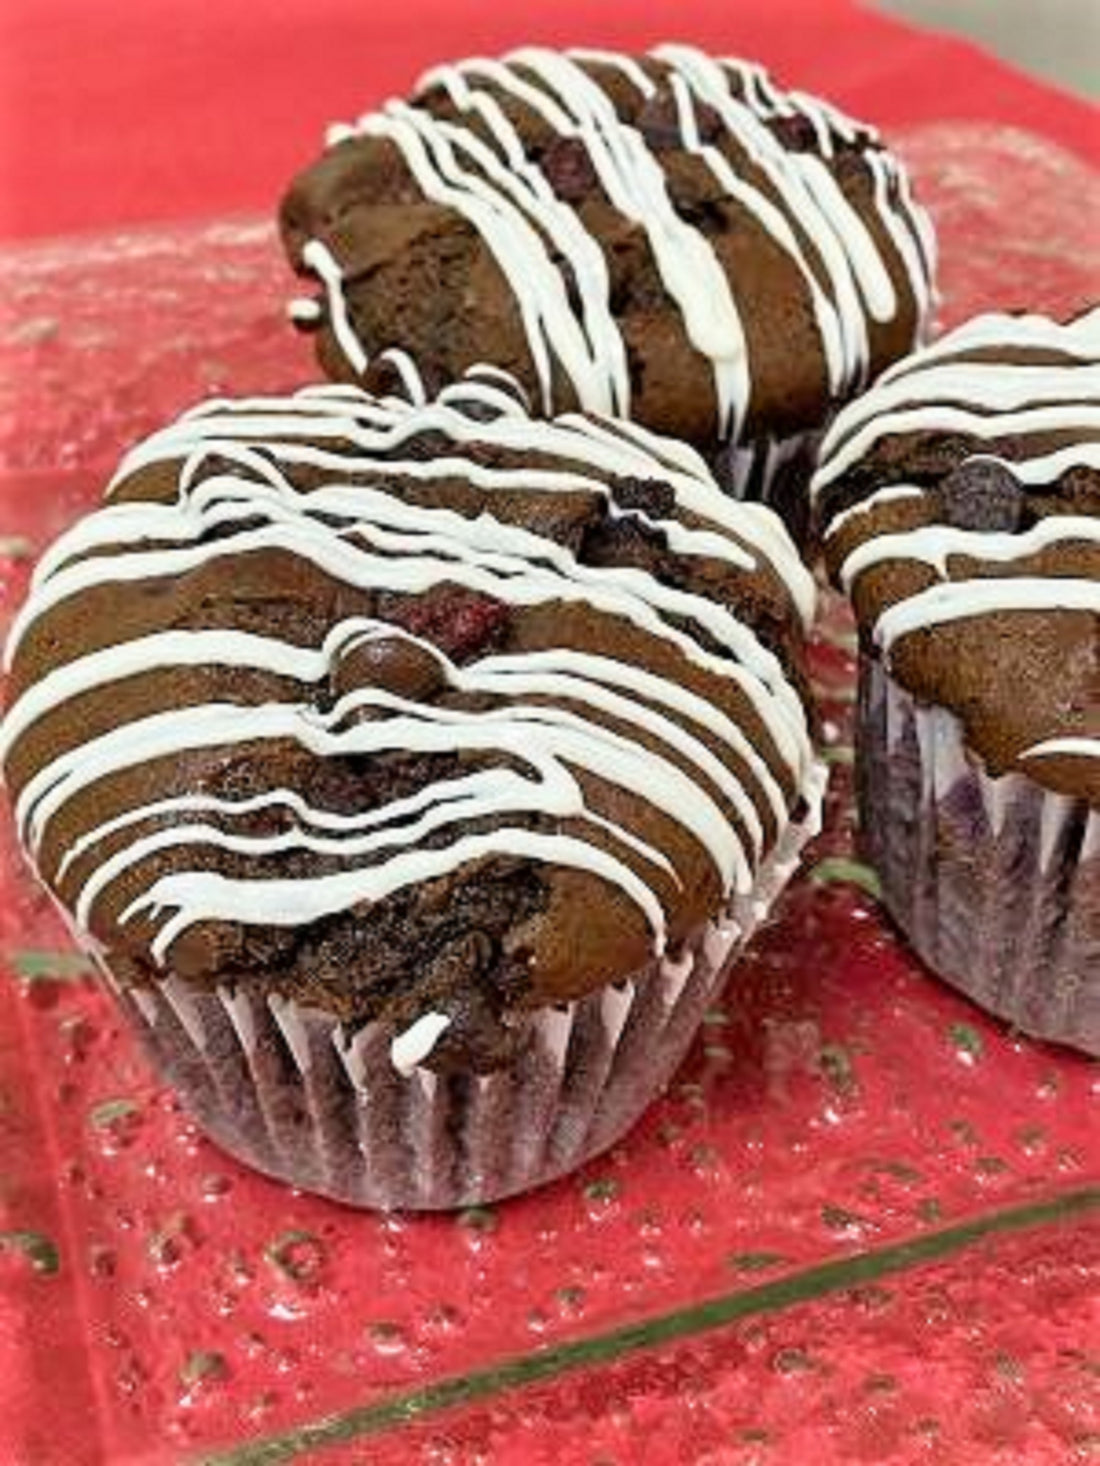 Triple-Chocolate Raspberry Muffins (using our Chocolate Whoopie Pie Mix)